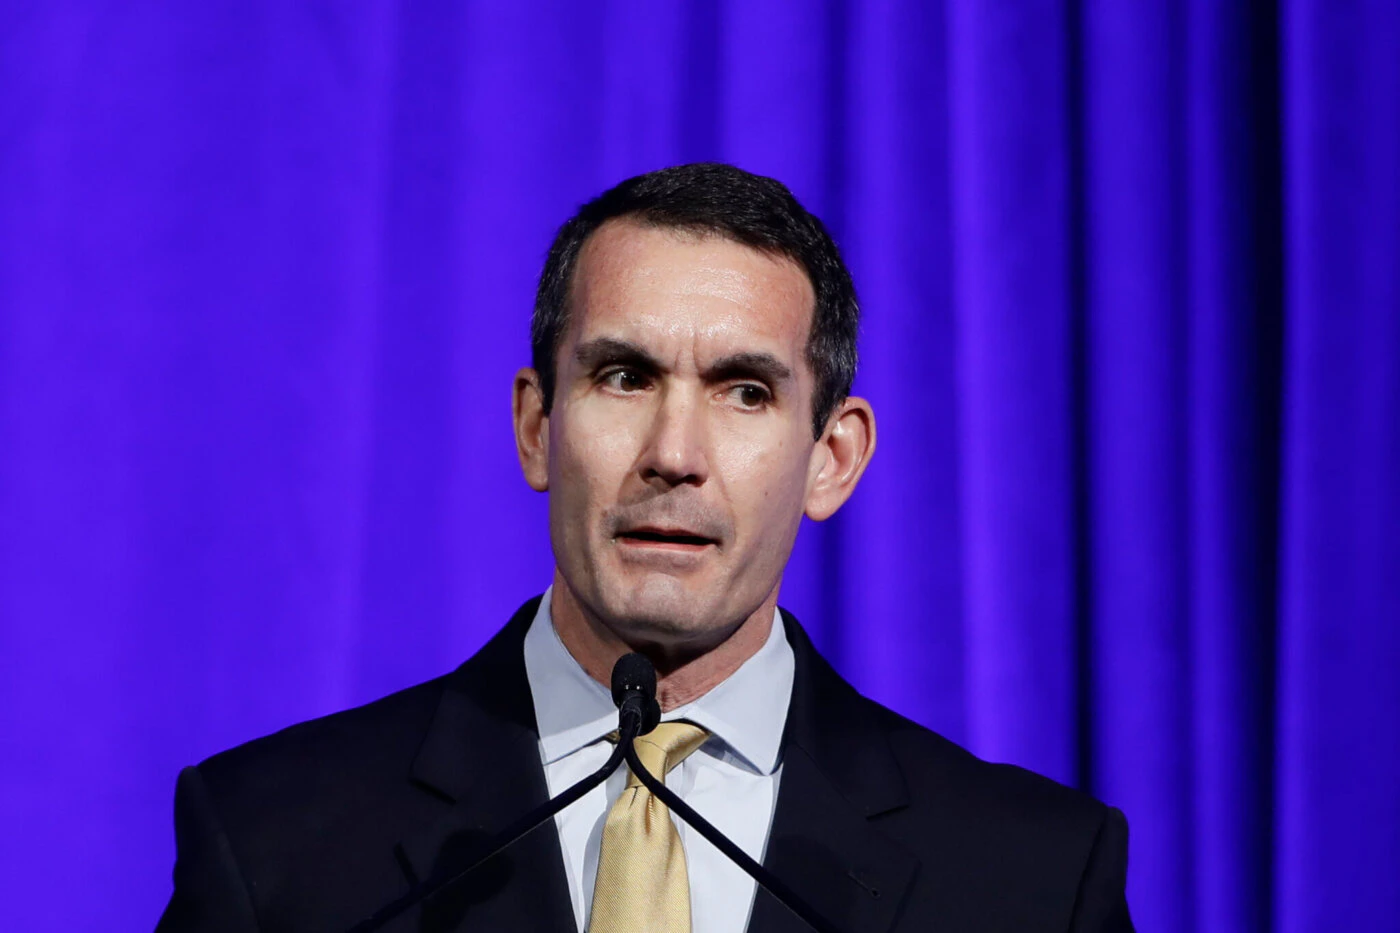 FILE - Pennsylvania Auditor General Eugene DePasquale speaks during a Pennsylvania Democratic Party fundraiser on Nov. 1, 2019, in Philadelphia. DePasquale, Pennsylvania's former two-term auditor general, said Thursday, June 1, 2023, that he will run for state attorney general in the 2024 election. (AP Photo/Matt Rourke, File)